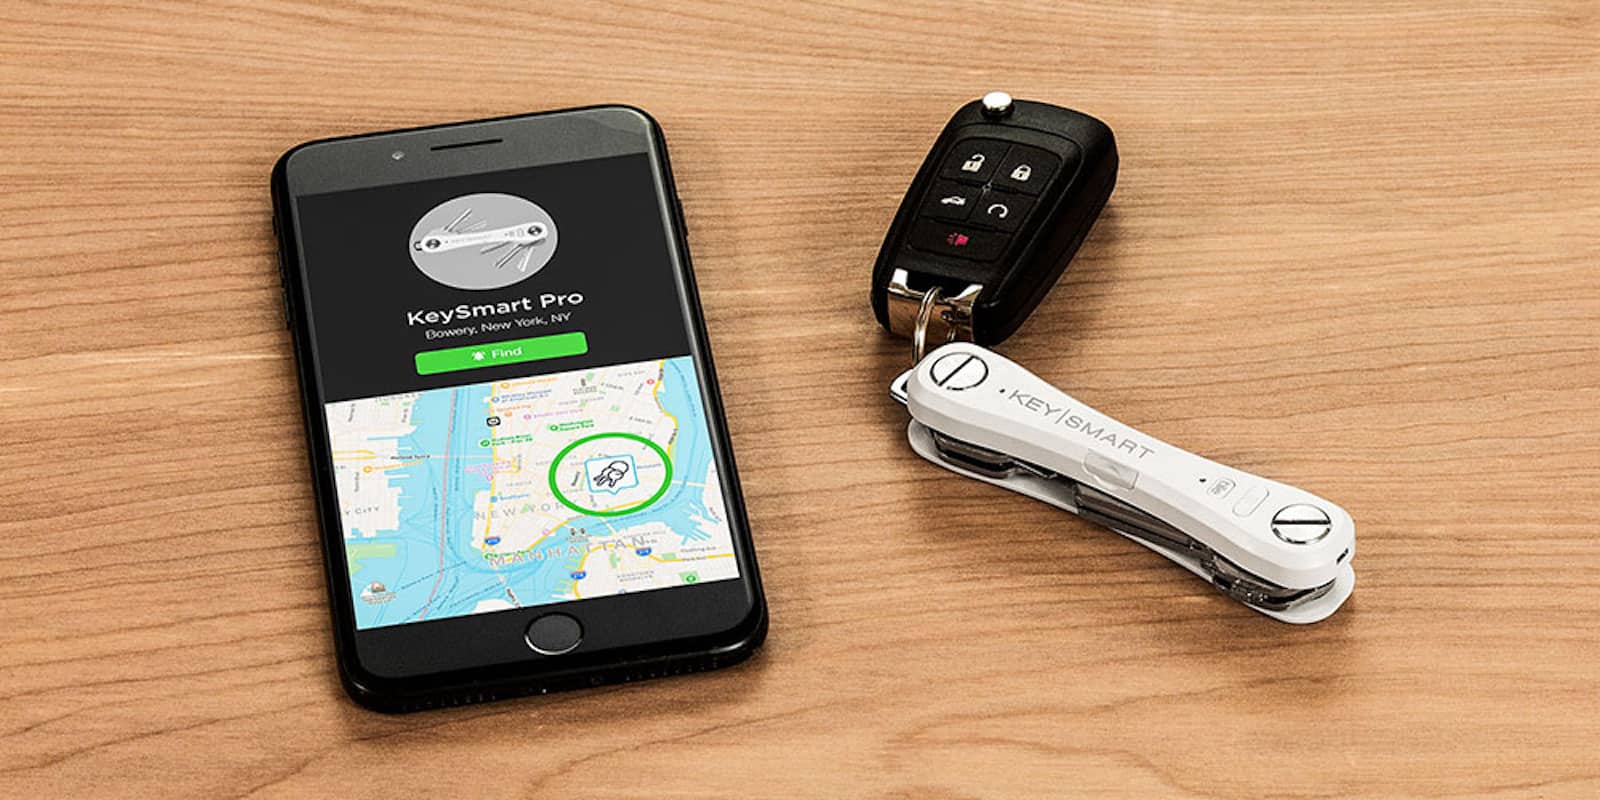 Forget your old key ring. This is a key keeper you can ring with your phone or find on a map, so you'll never lose it.